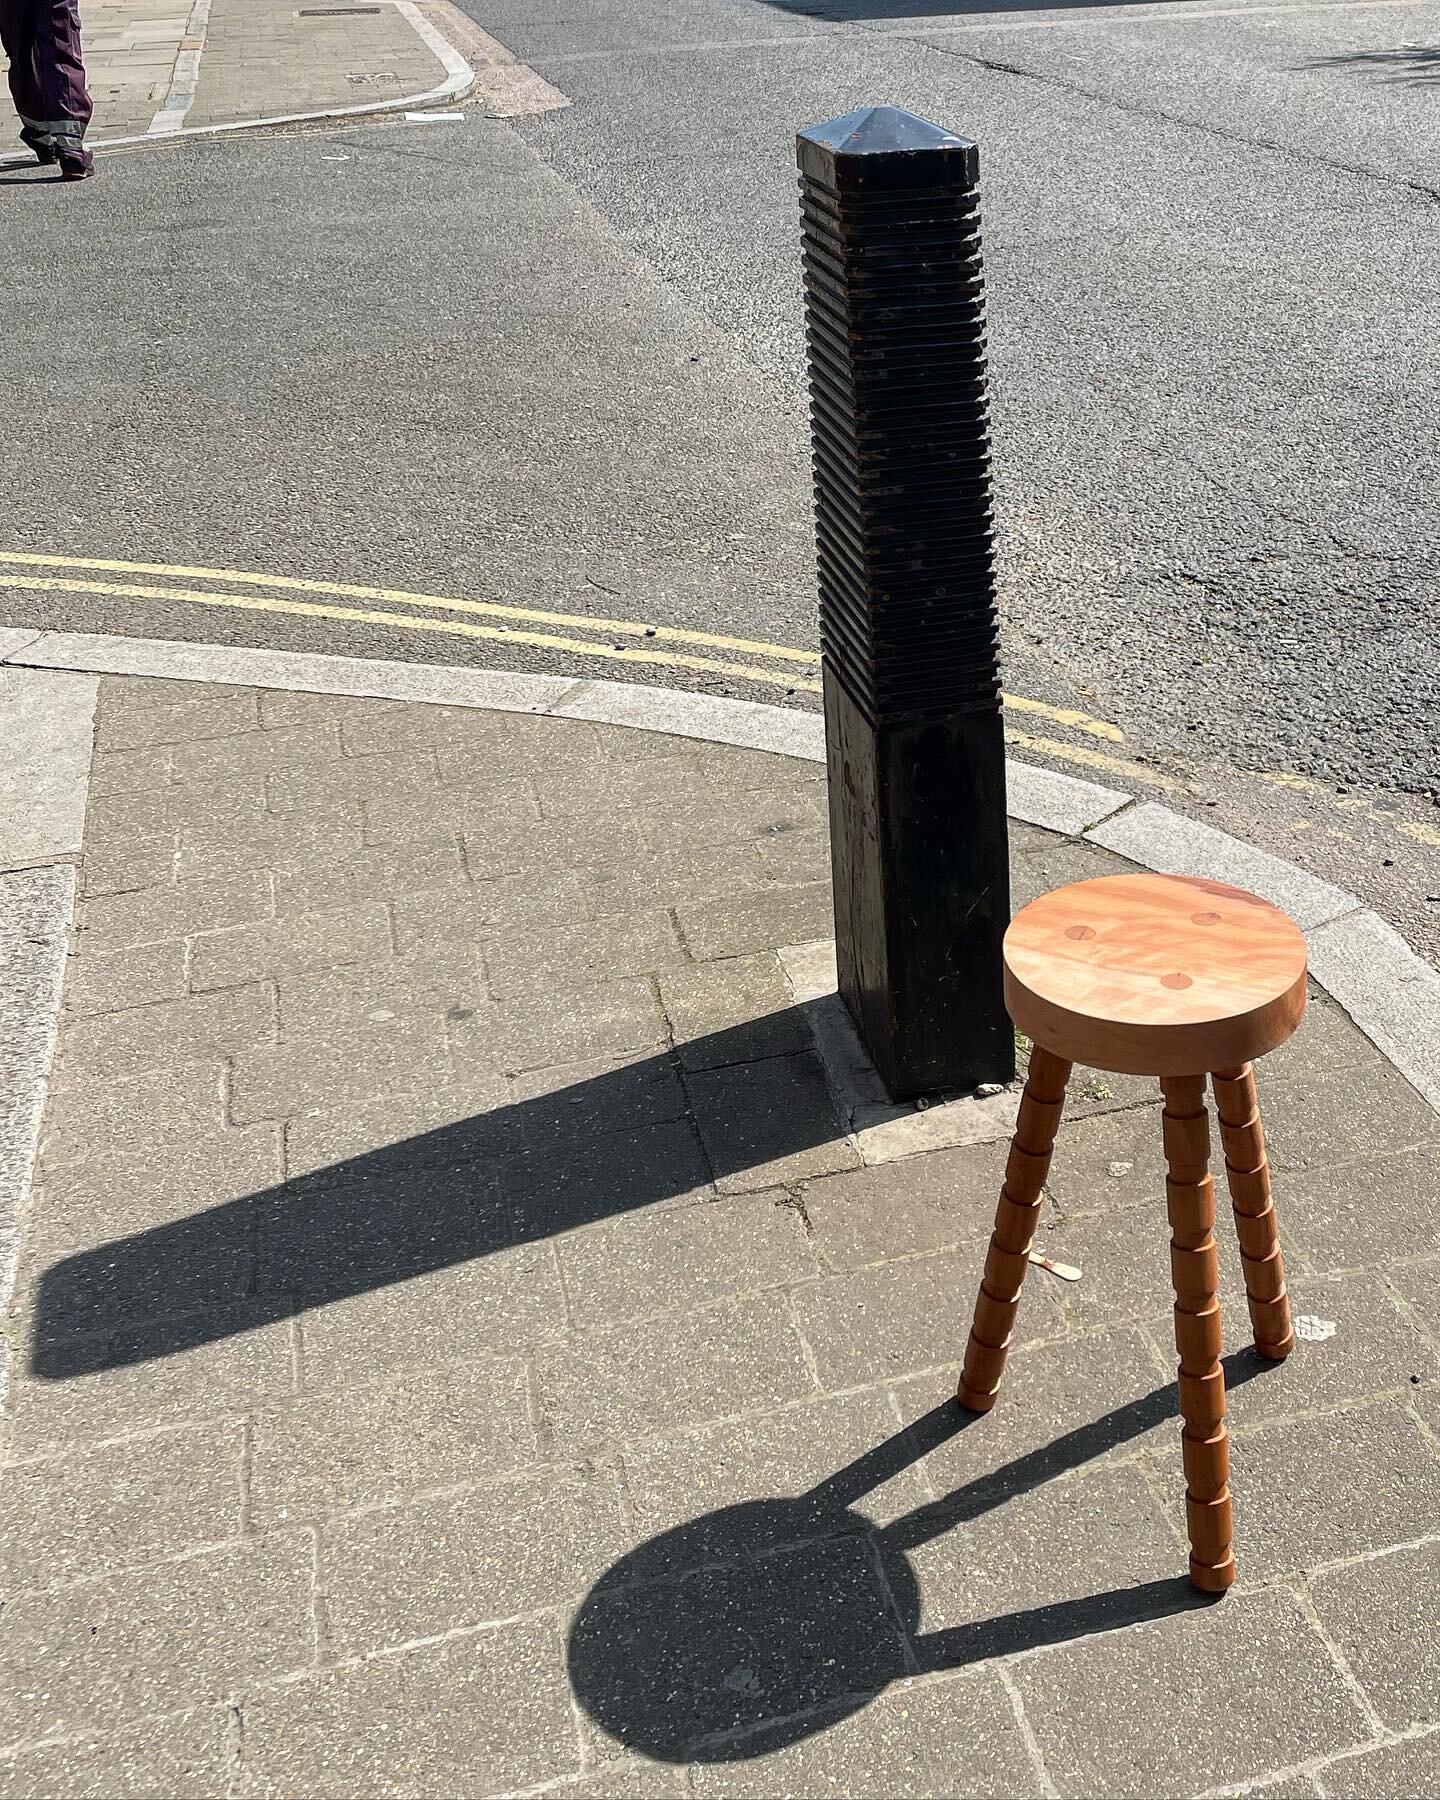 My finished stool photographed in locations around Finsbury Park.